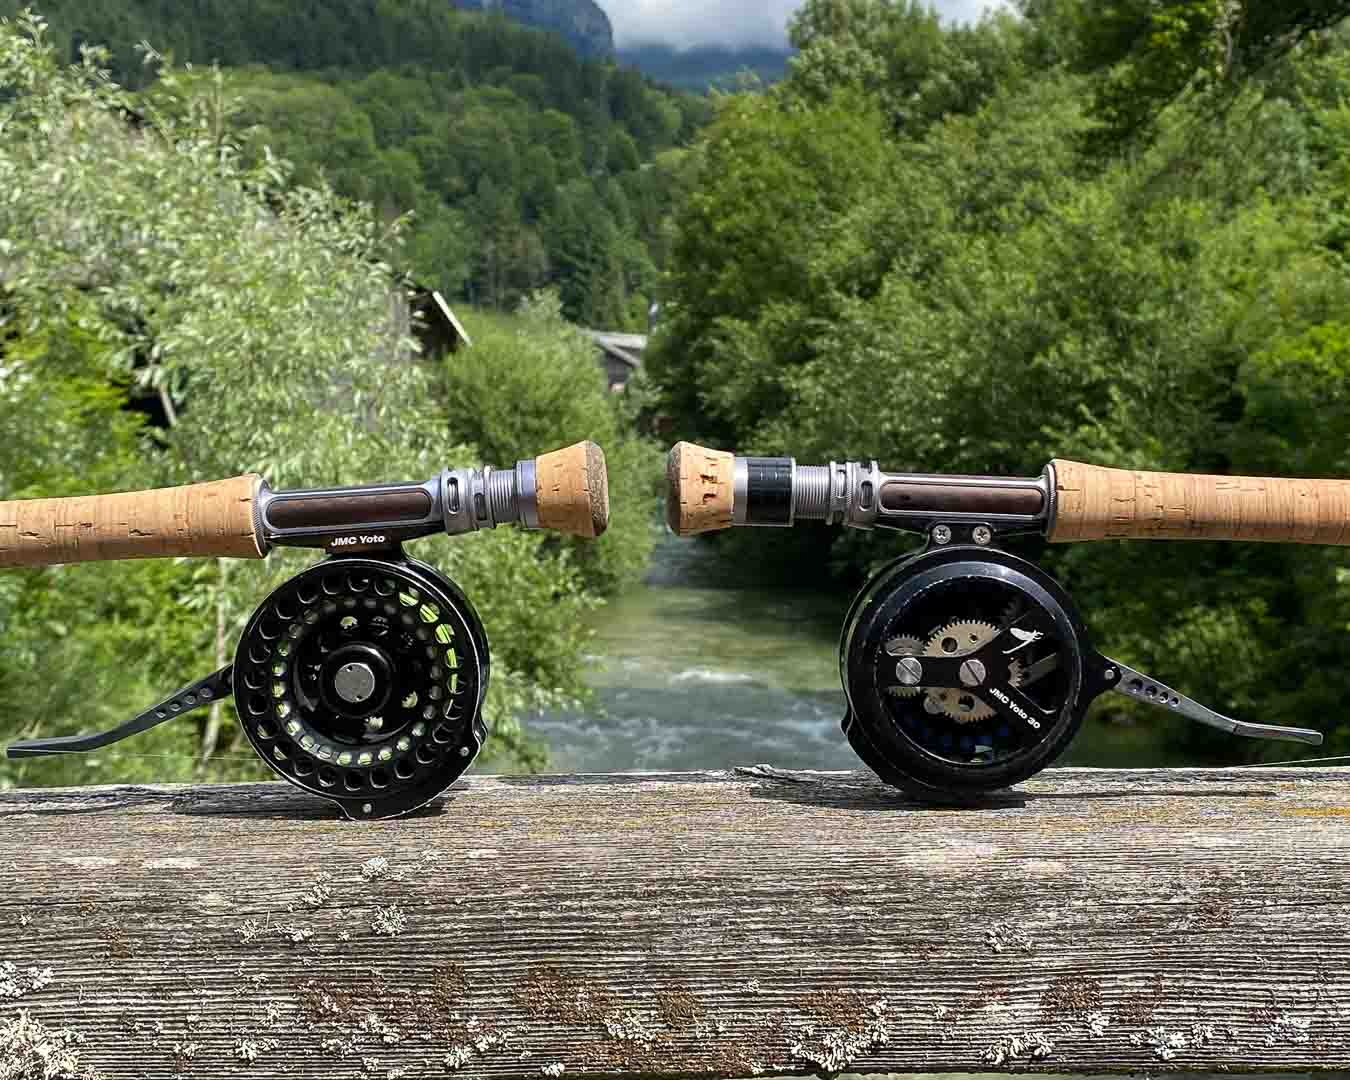 Semi-automatic fly reels & accessories